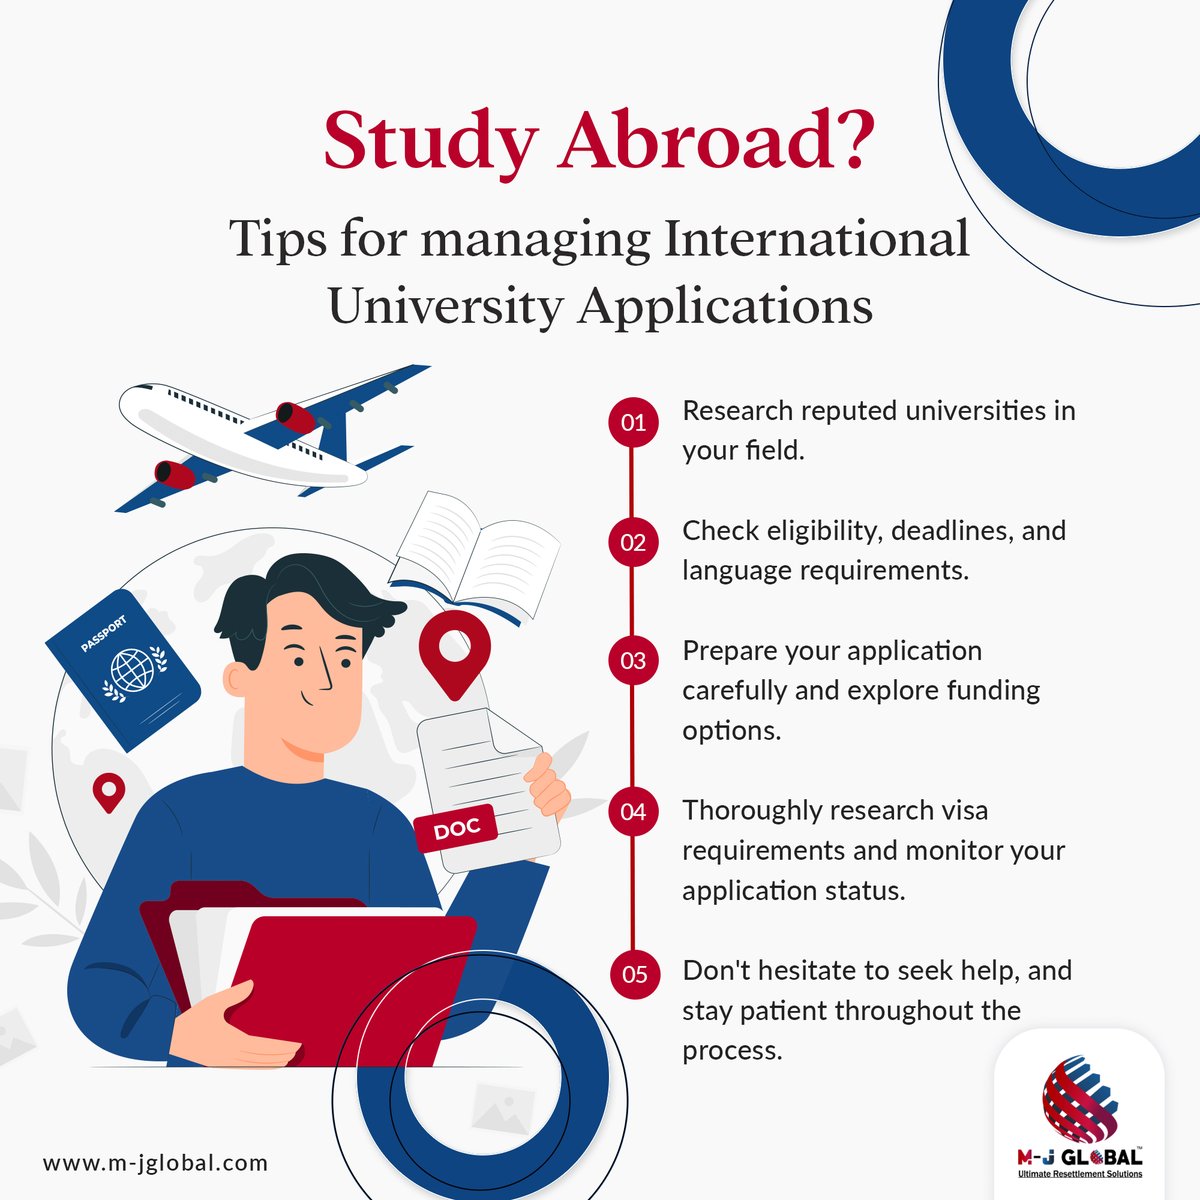 Unlock the World🌍: Ace your university application abroad with our tips on researching universities, eligibility criteria, application preparation, funding options, and visa requirements. 

#studyabroad #educationconsultation
#overseaseducation #admissionabroad